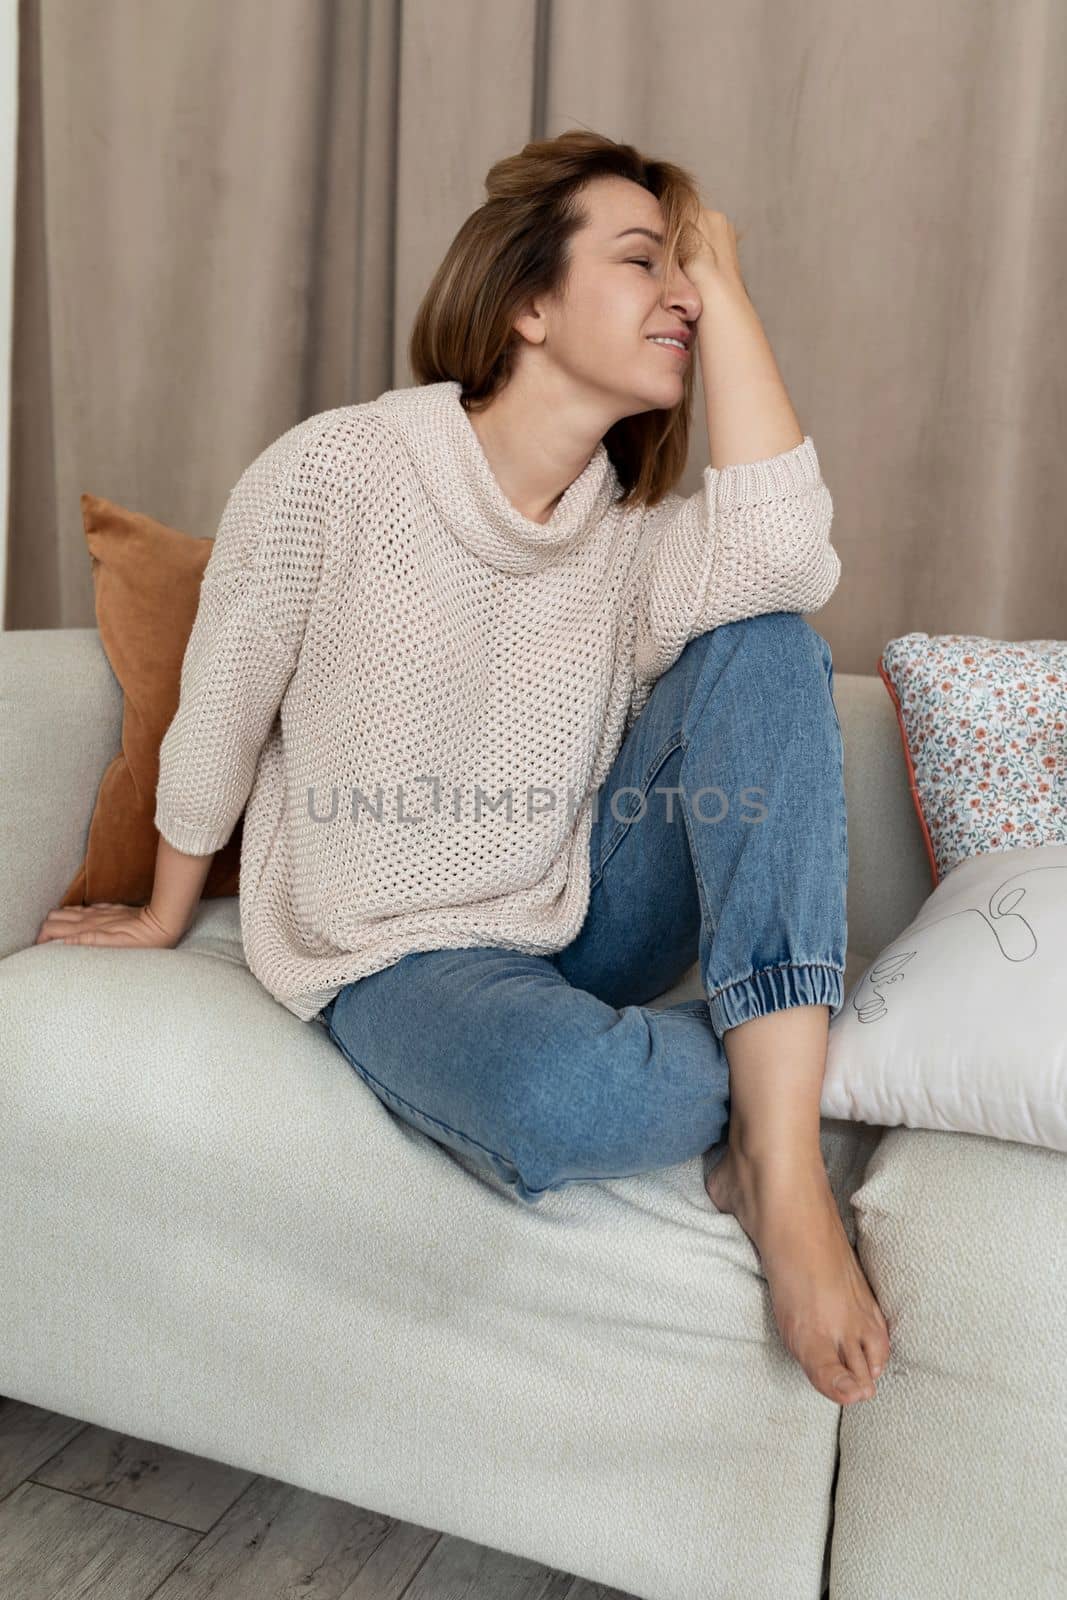 stylish confident middle-aged woman sitting and laughing on the couch.